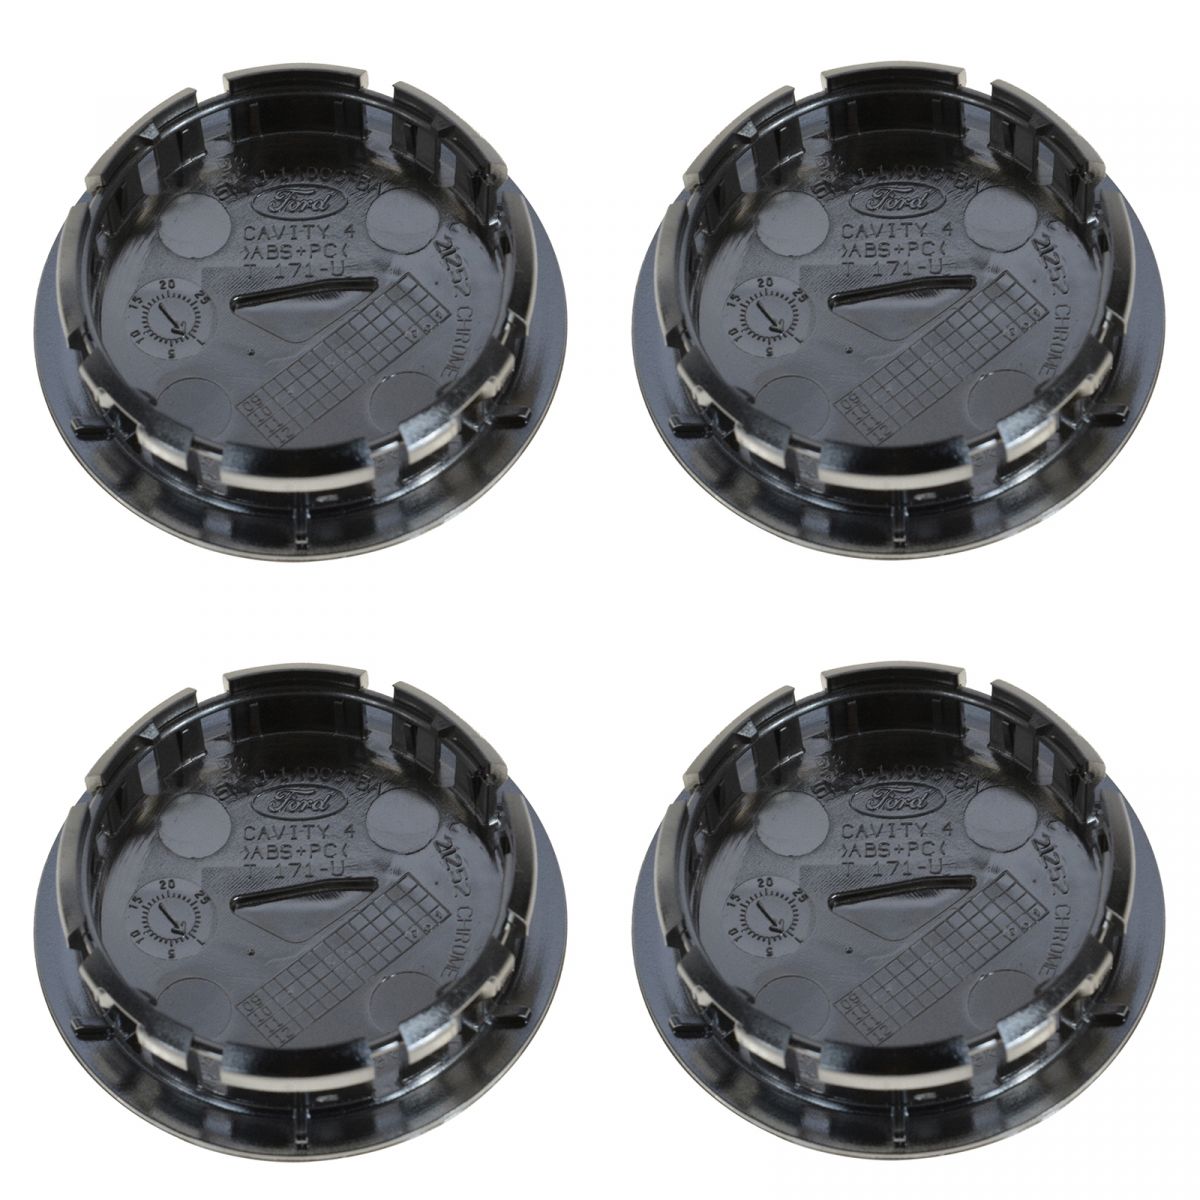 OEM Wheel Center Cap With Pony Set Of 4 Front Rear LH RH For 0509 Ford